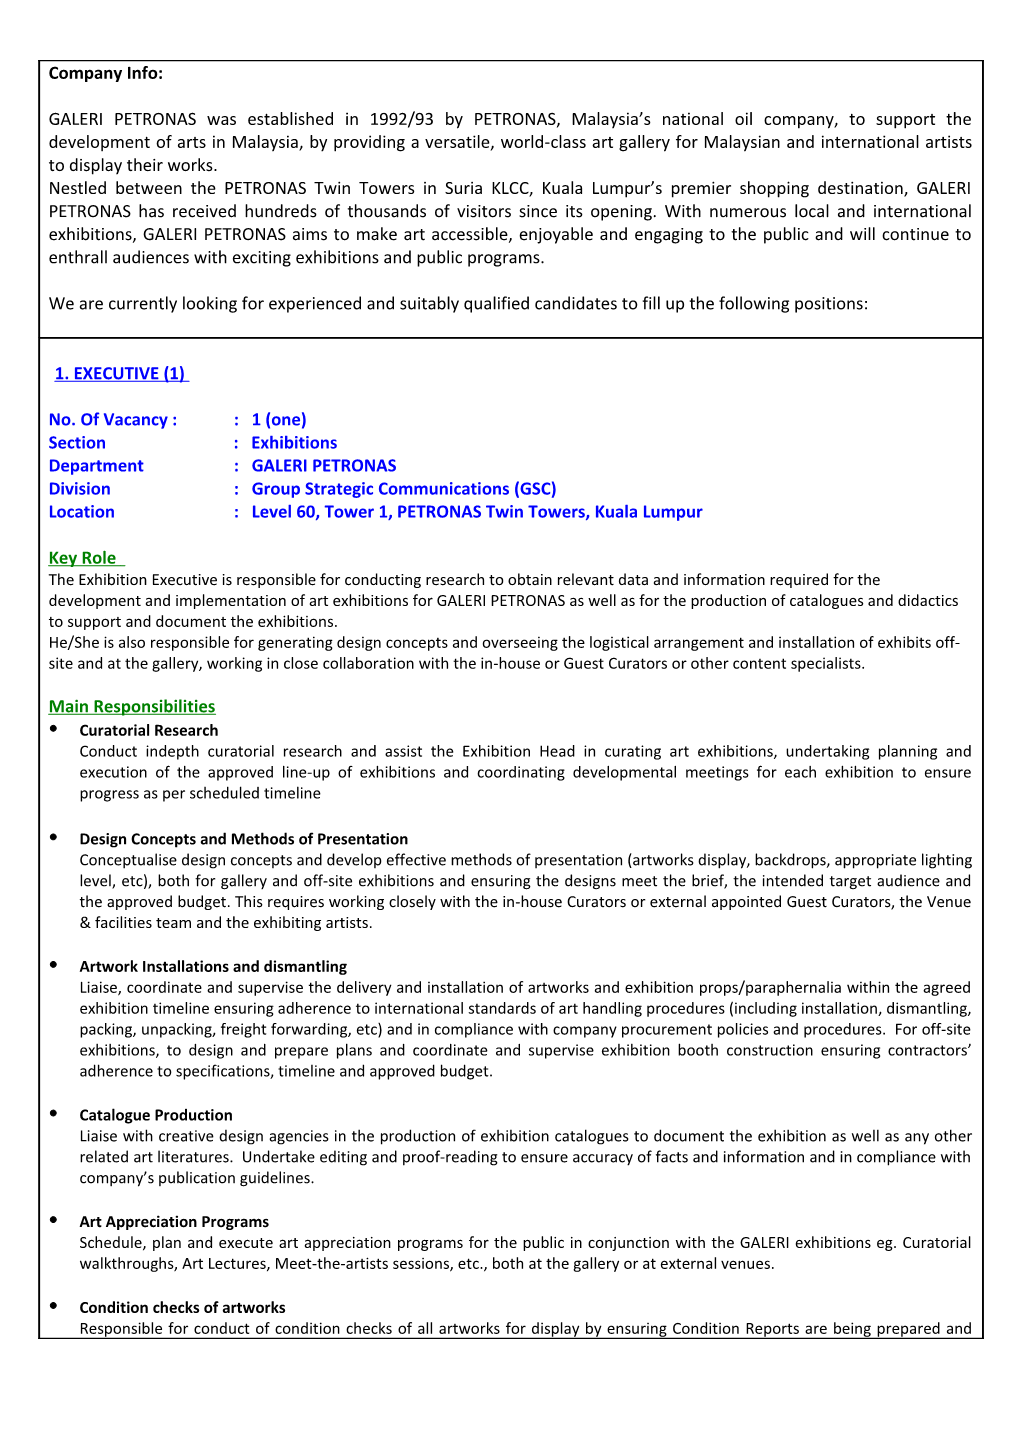 Vacant Position in GP (Exhibitions Executive)